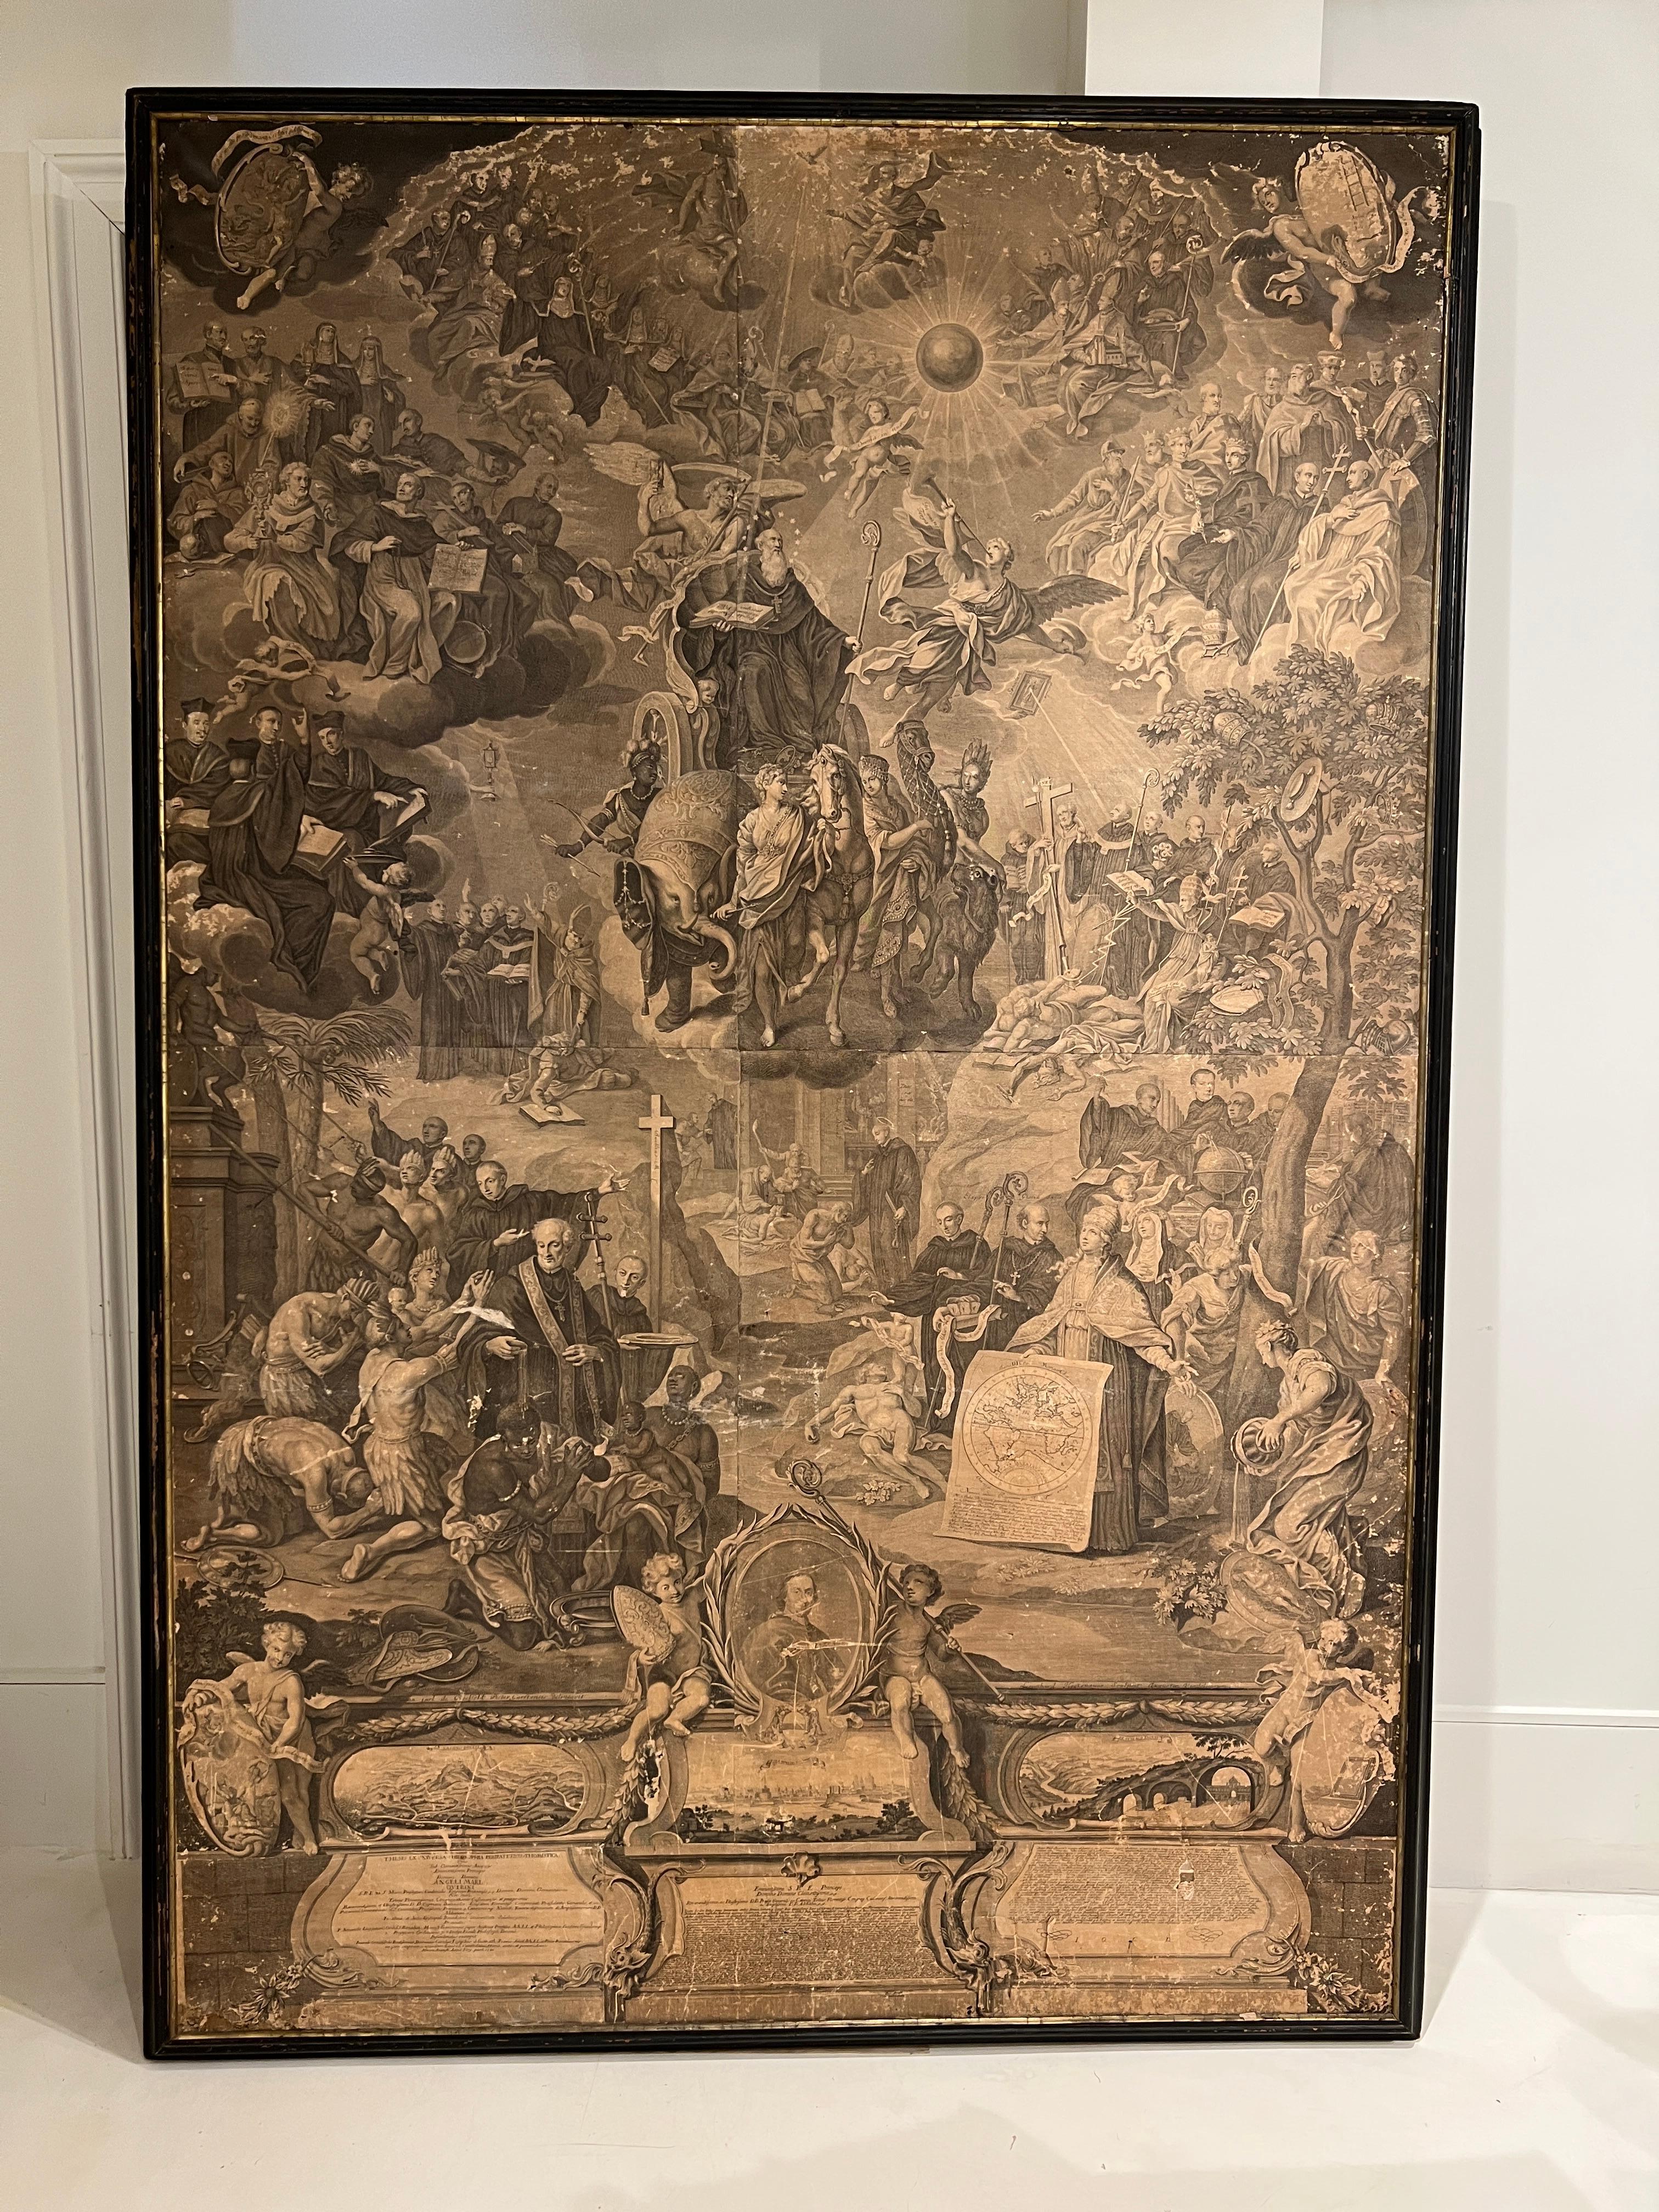 Impressive 17th Century Leonhard II Heckenauer print that is signed and framed.  The artist was a copper engraver from Bartholomaus Kilian.   He specialized in portraits and extremely large format thesis prints.  
